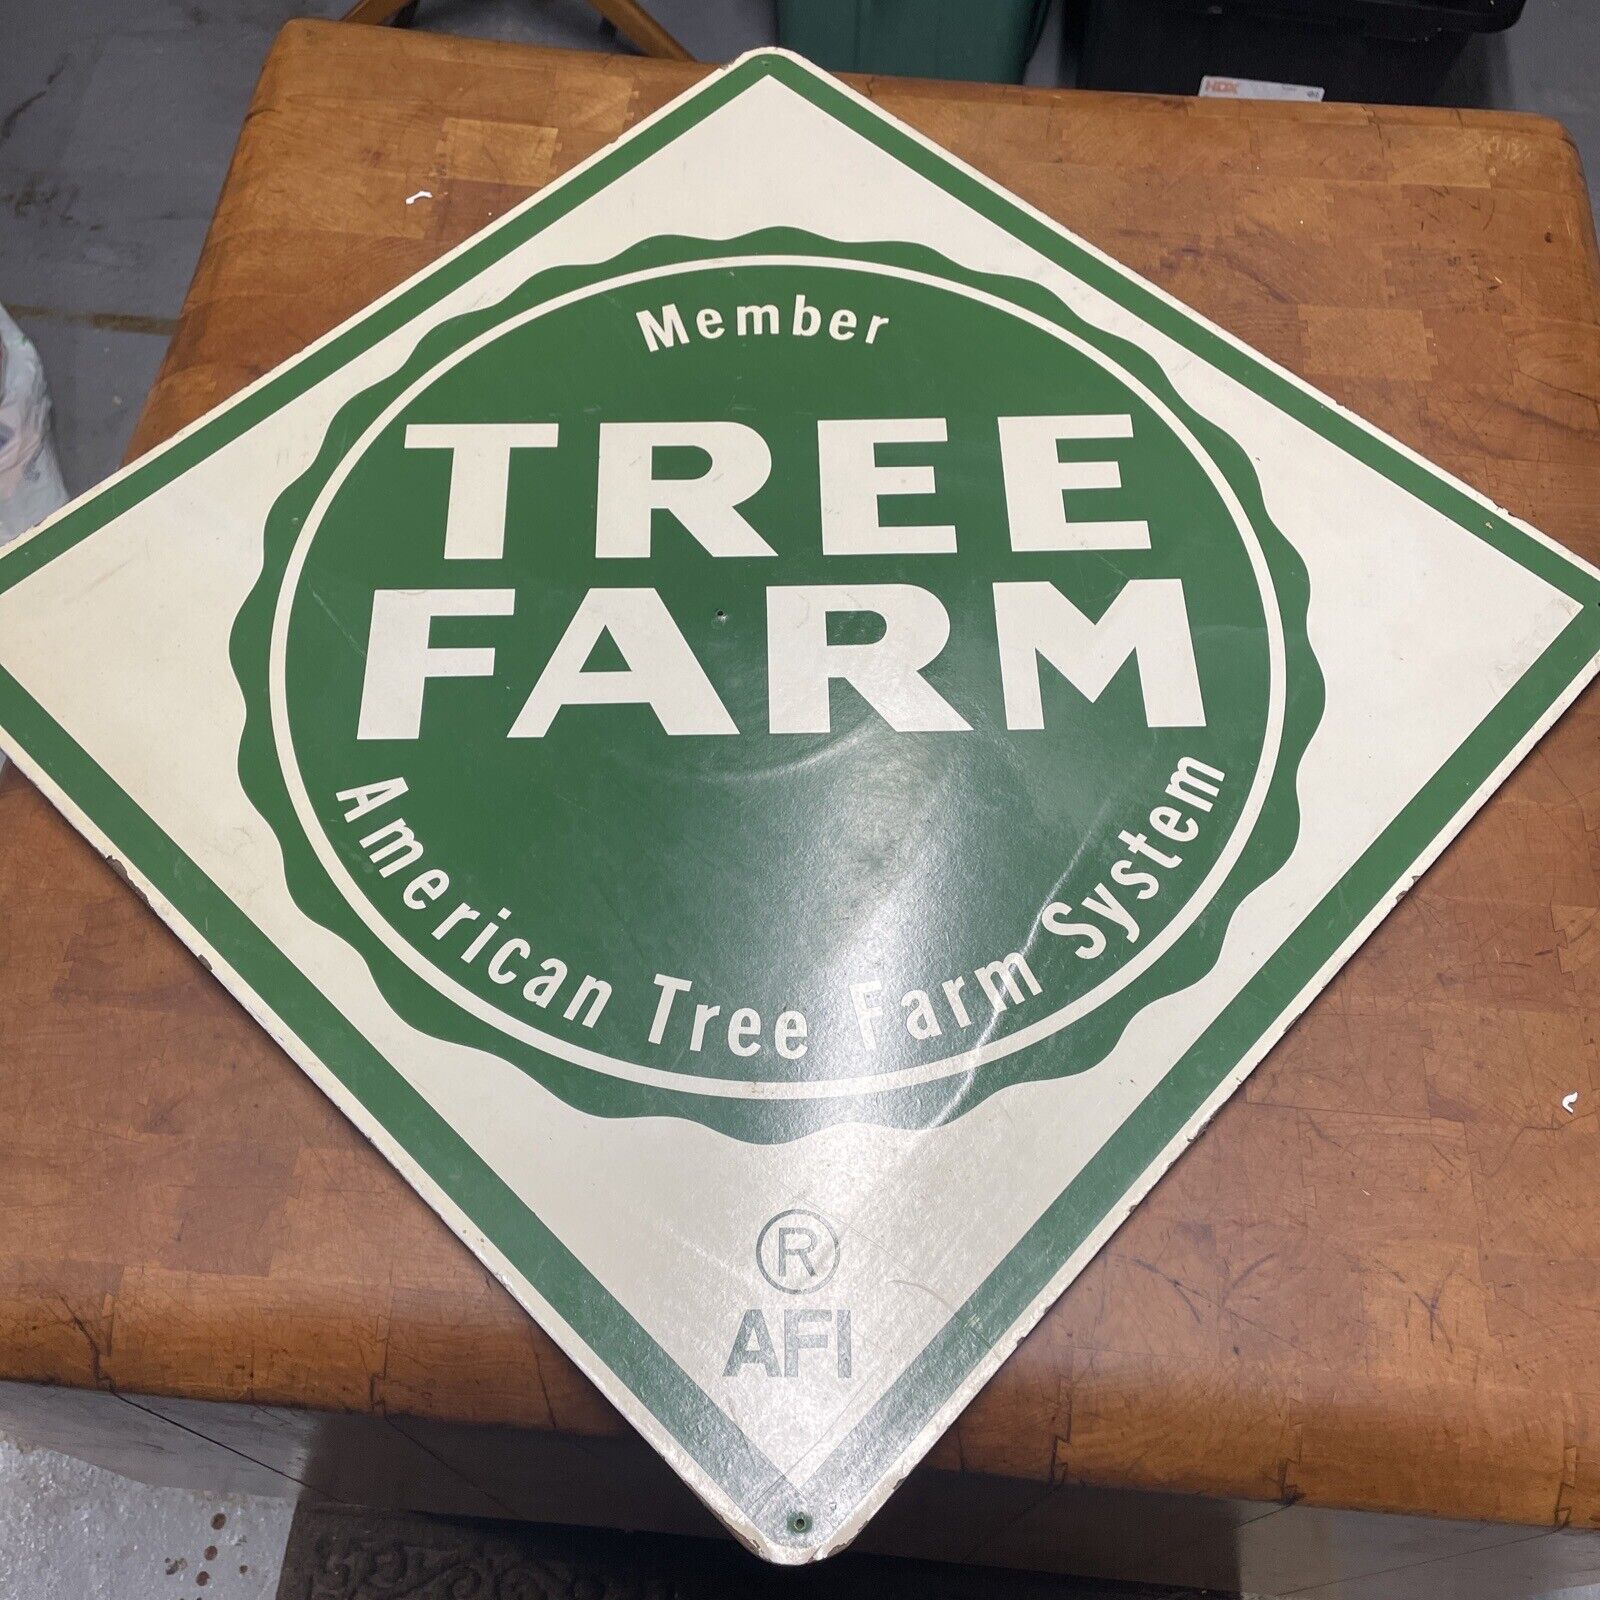 Vintage American Tree Farm System Member Composite Wood Sign by AFI 22”x22”